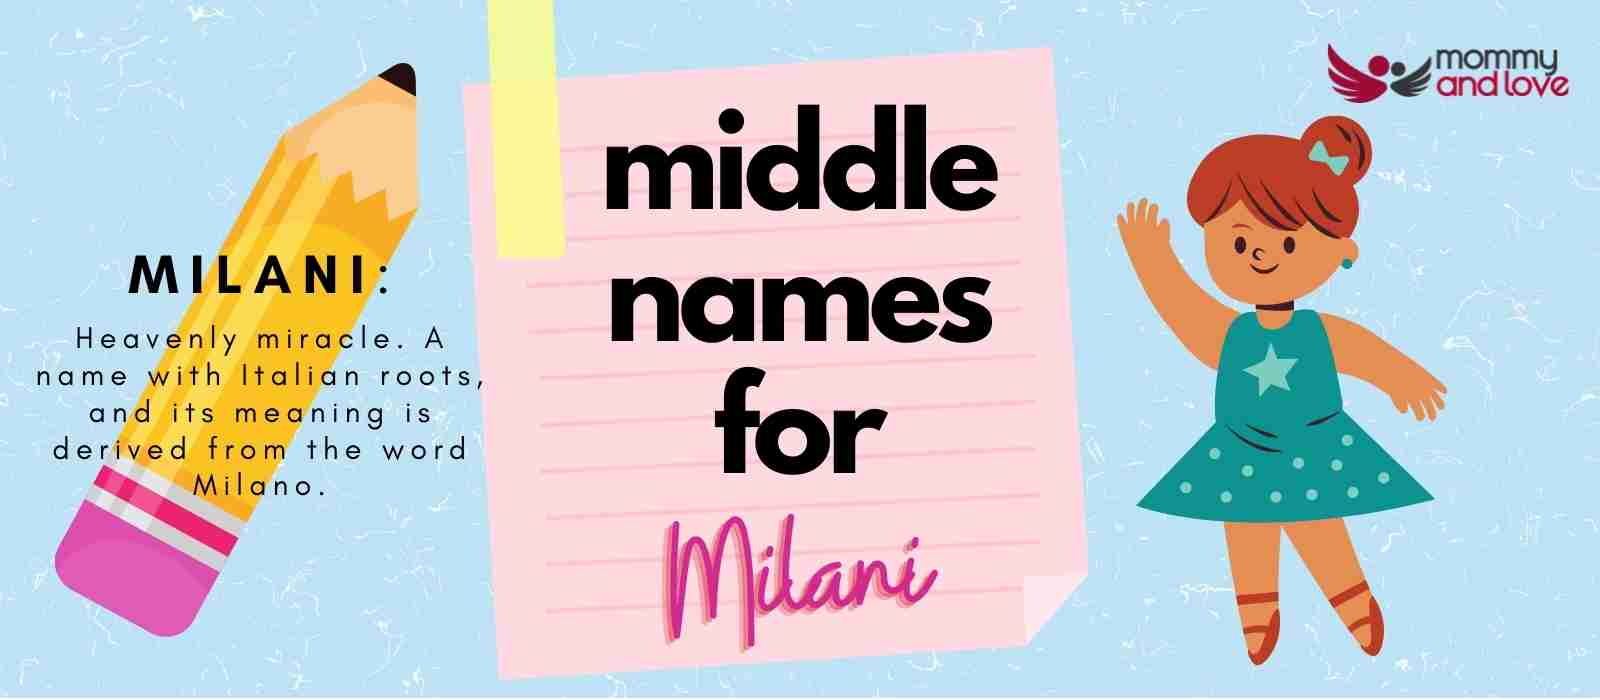 Middle Names for Milani